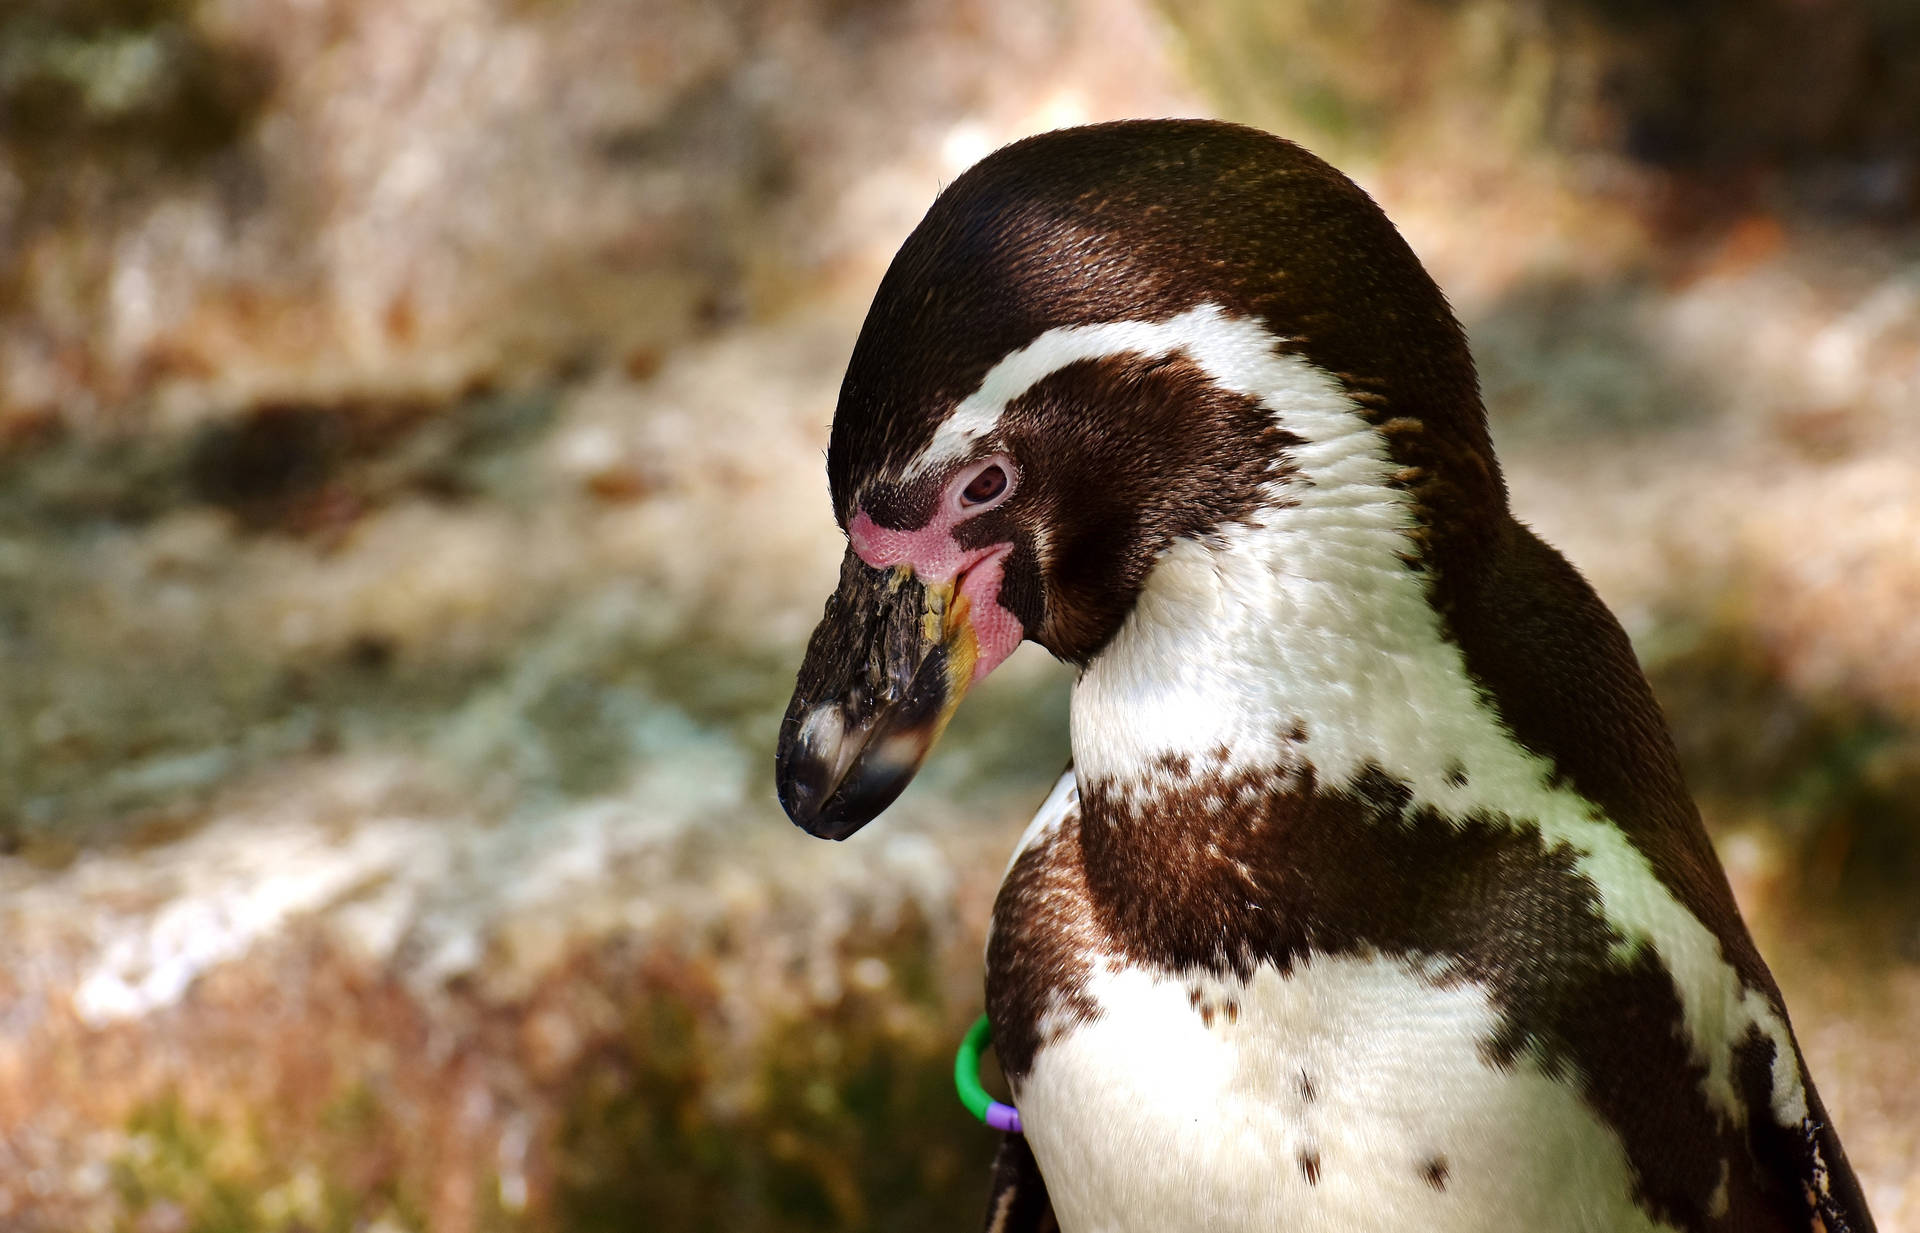 Penguin 5272X3385 Wallpaper and Background Image